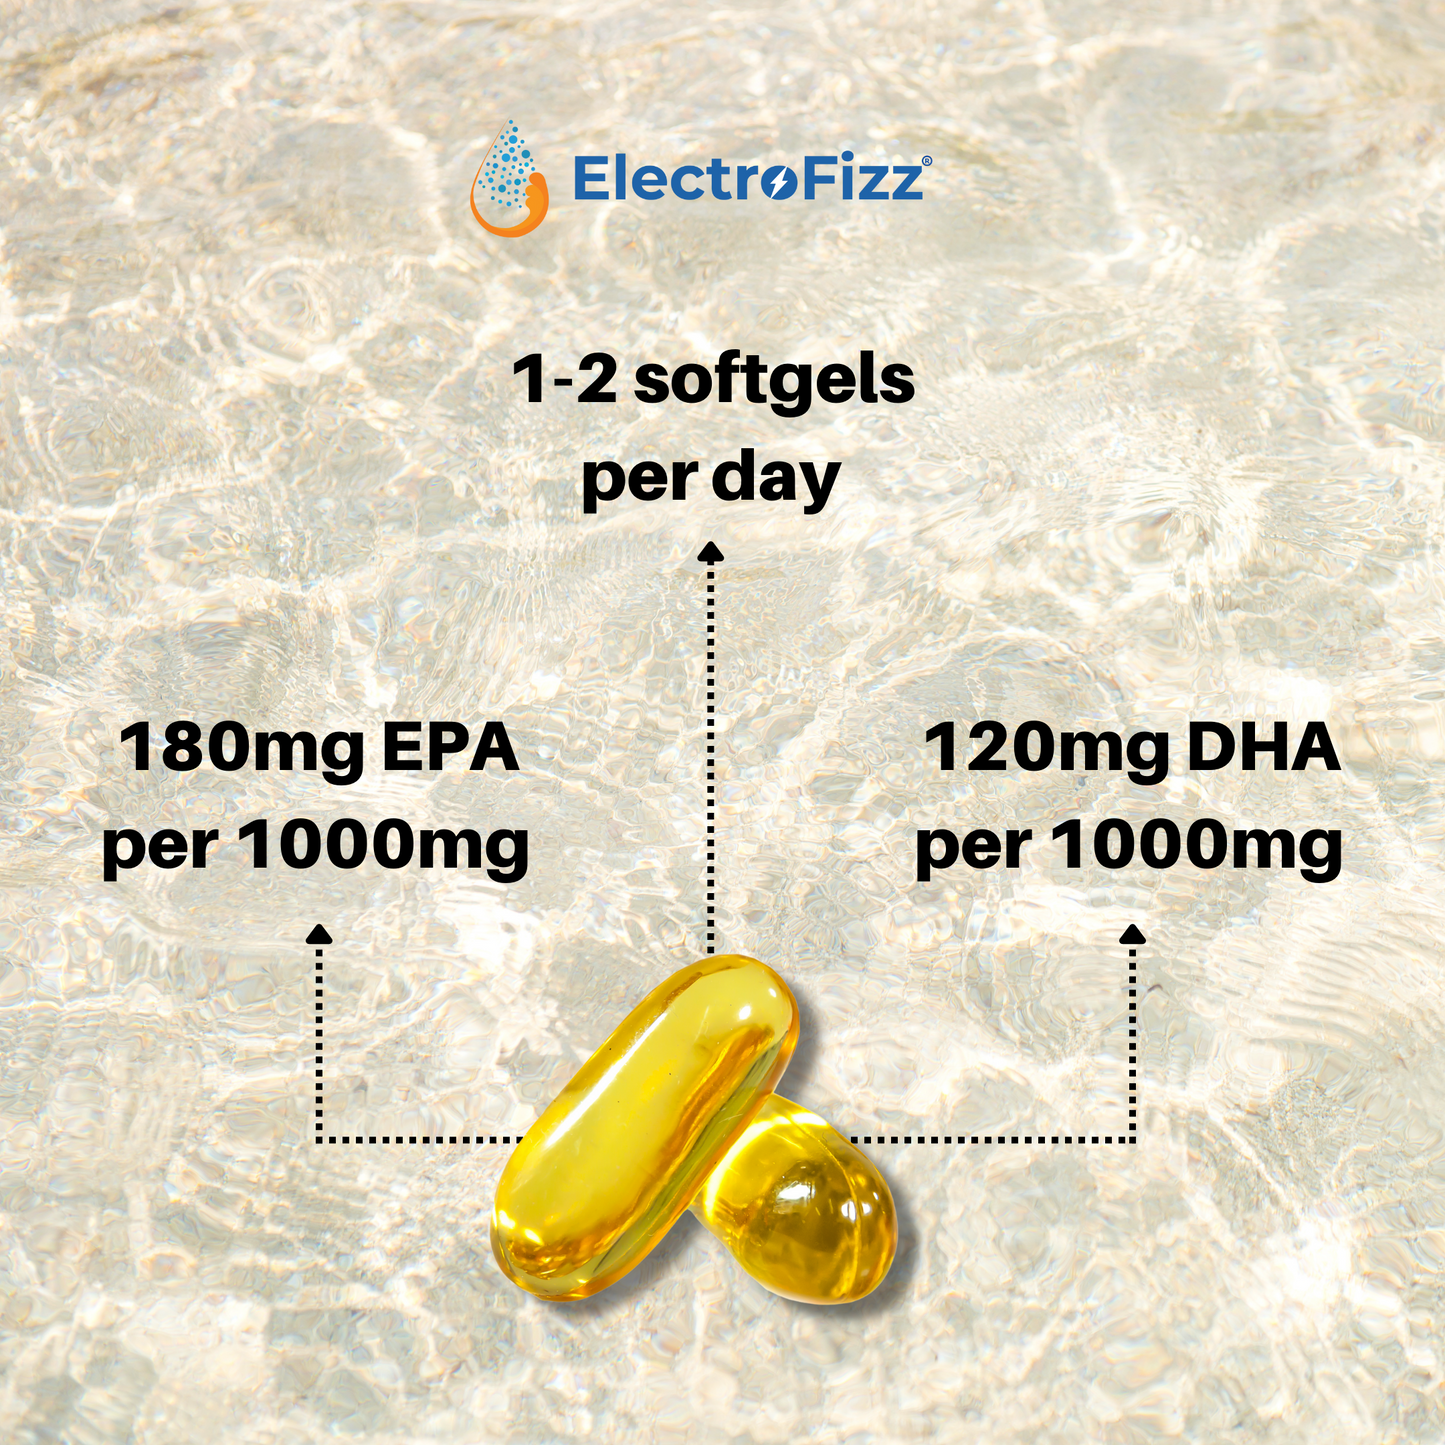 ElectroFizz Premium Fish Oil Capsule For Men & Women (1000mg Omega 3 with 180 mg EPA & 120 mg DHA), for Brain, Heart, Eyes, and Joints Health- 60 Omega3 Fish Oil Softgels